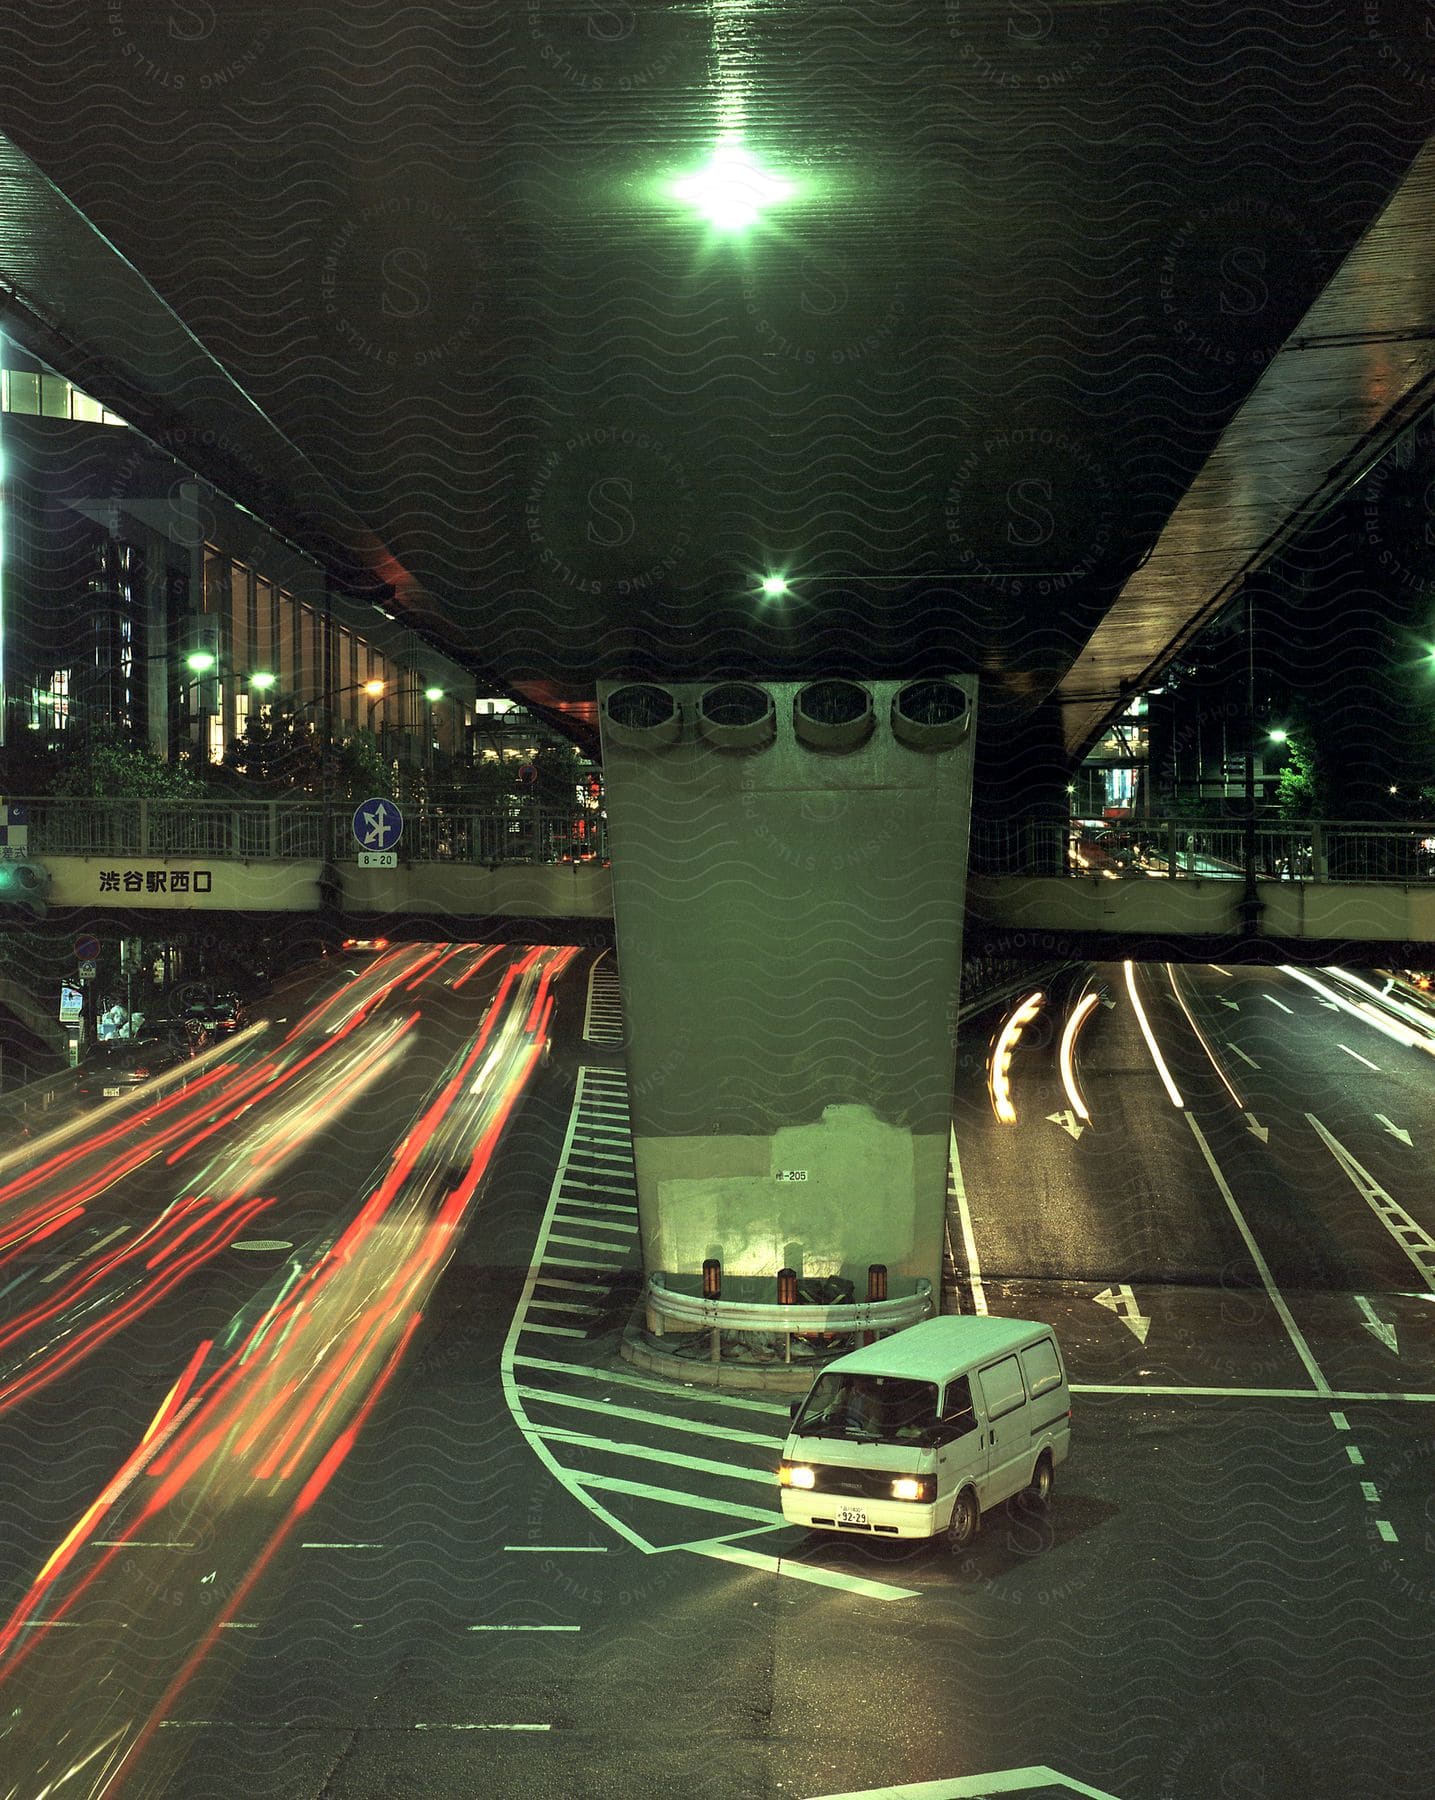 A van waits to turn under an overpass at night in a metropolis with streaks of blurred light from moving traffic